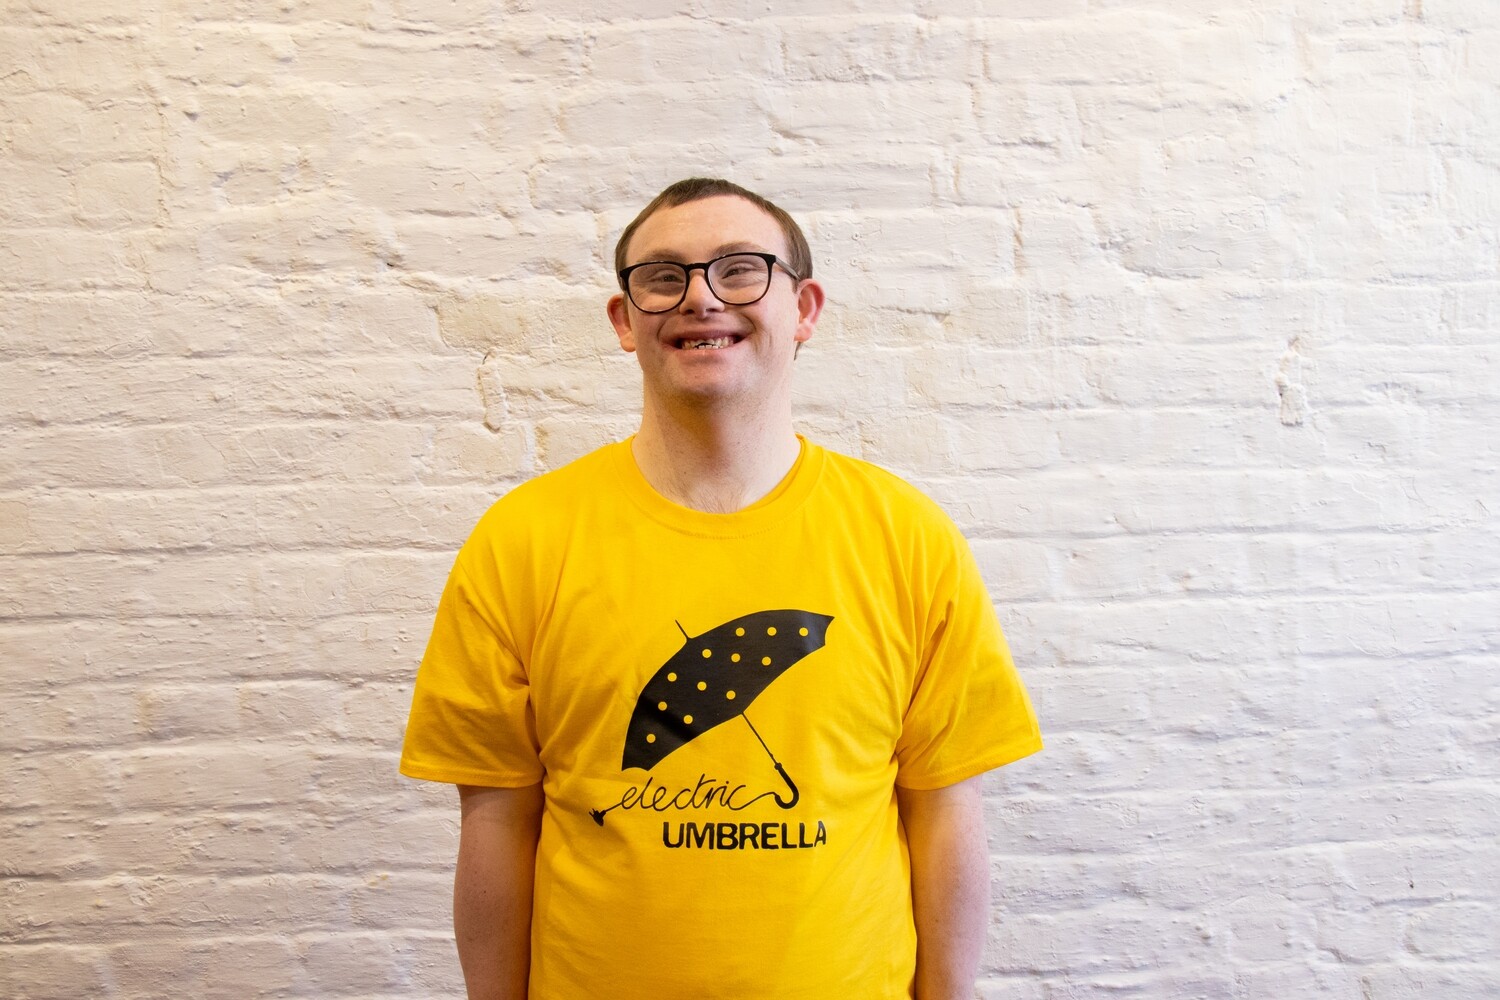 Electric Umbrella T-shirt Yellow ( Kids' sizes, too!) - were £15 (adults) and £9.99 (kids) - NOW HALF PRICE!